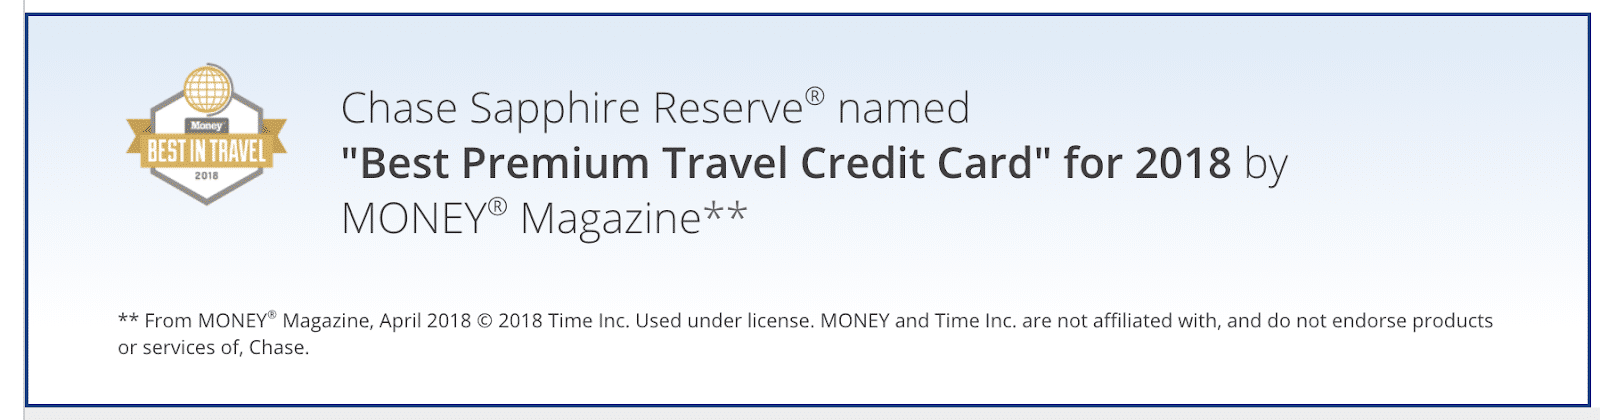 accolade of being best travel credit card